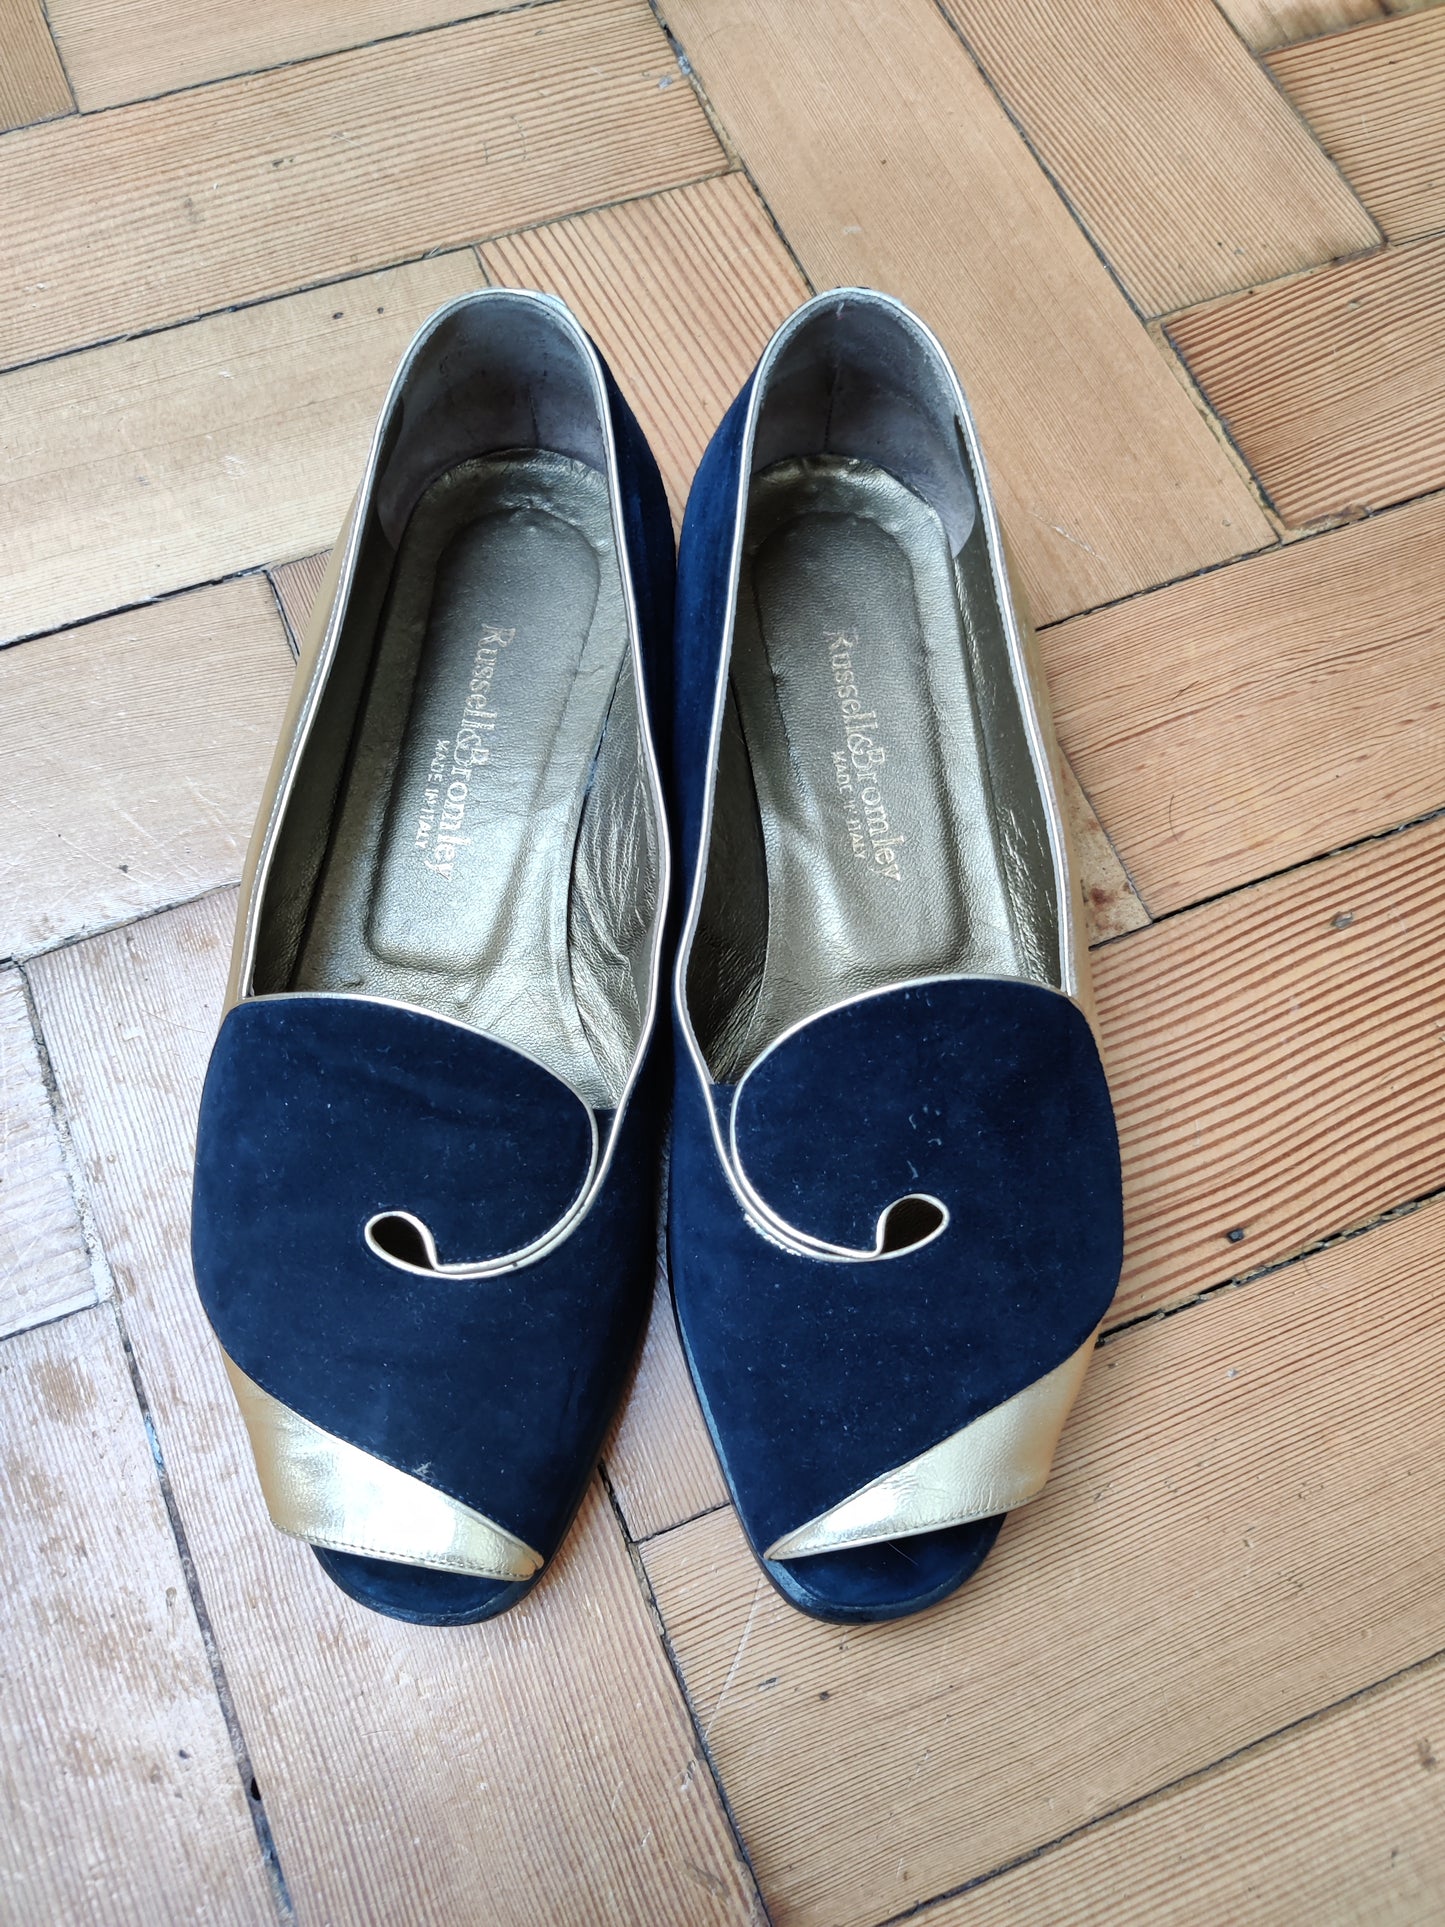 Stunning gold and navy Russell & Bromley flat shoes size 4.5